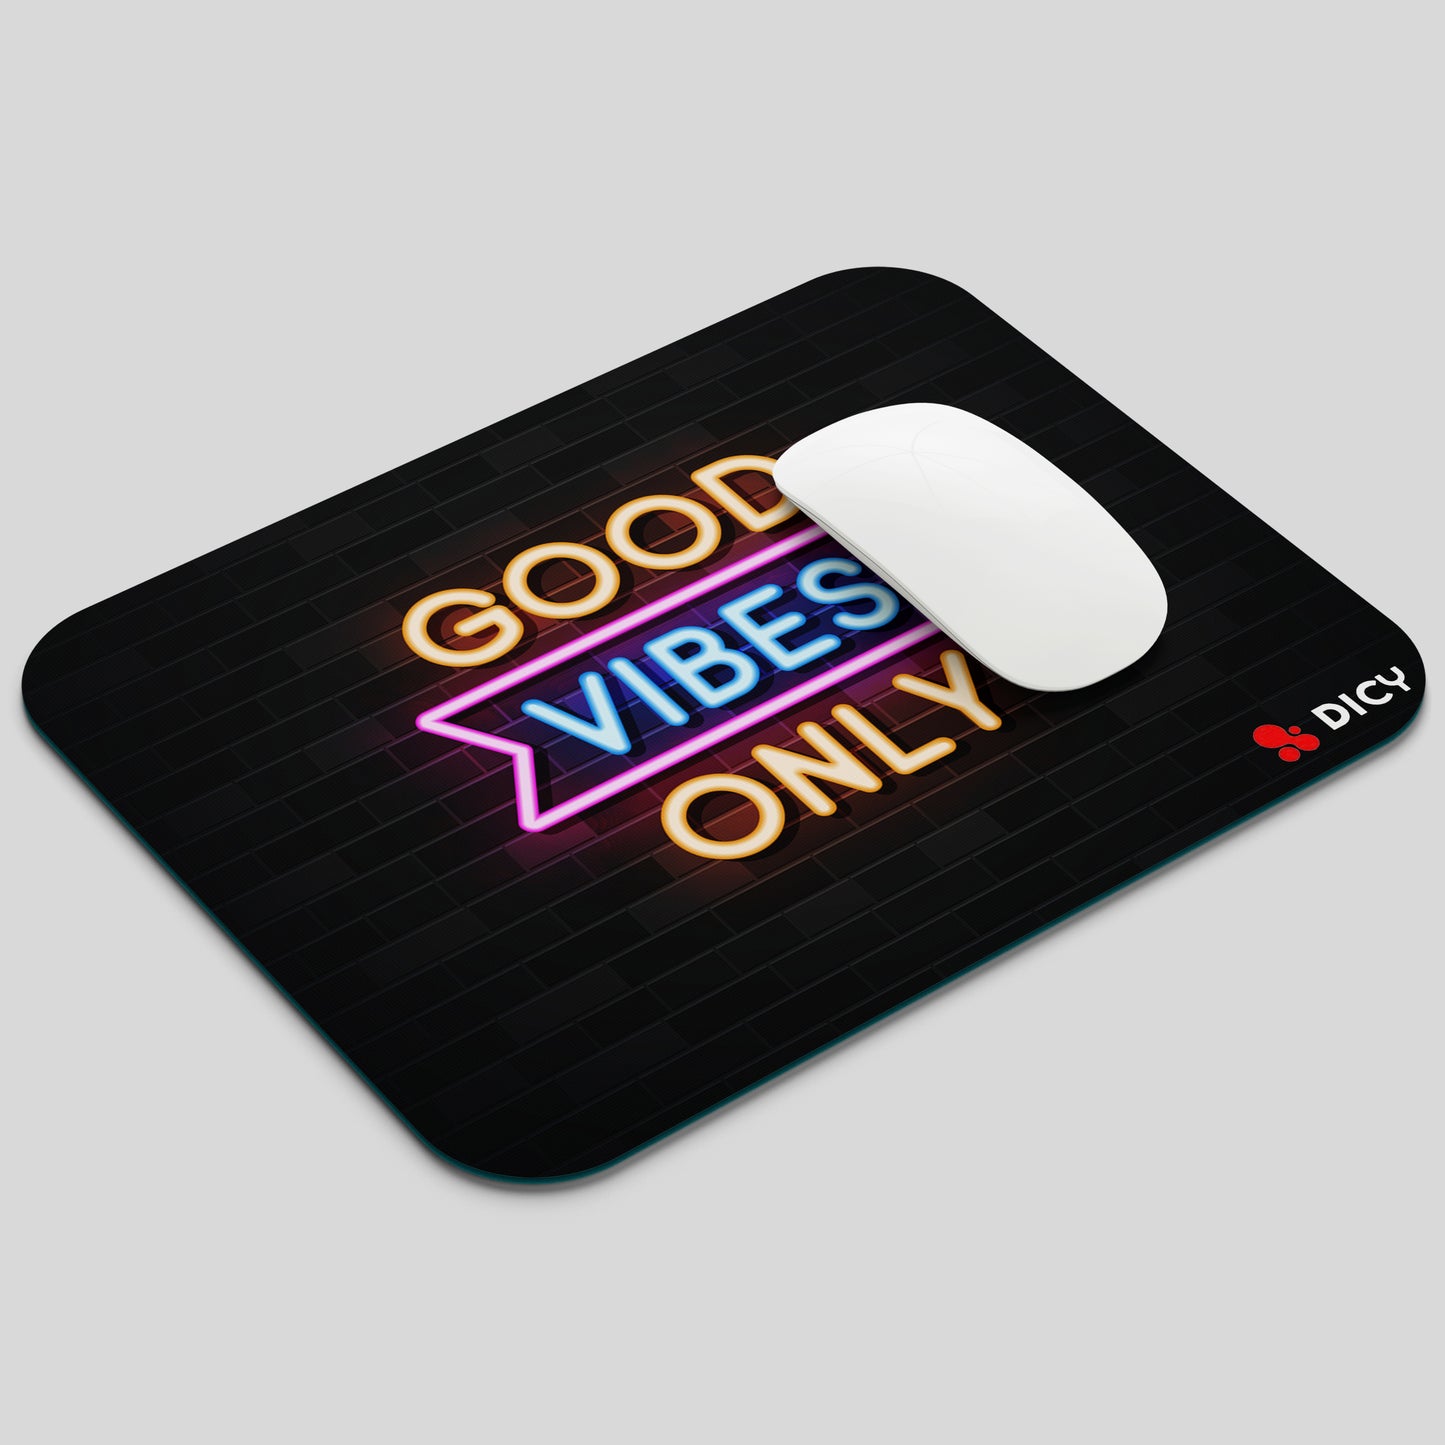 Mouse pad for Office Laptop/PC | Good Vibes Only